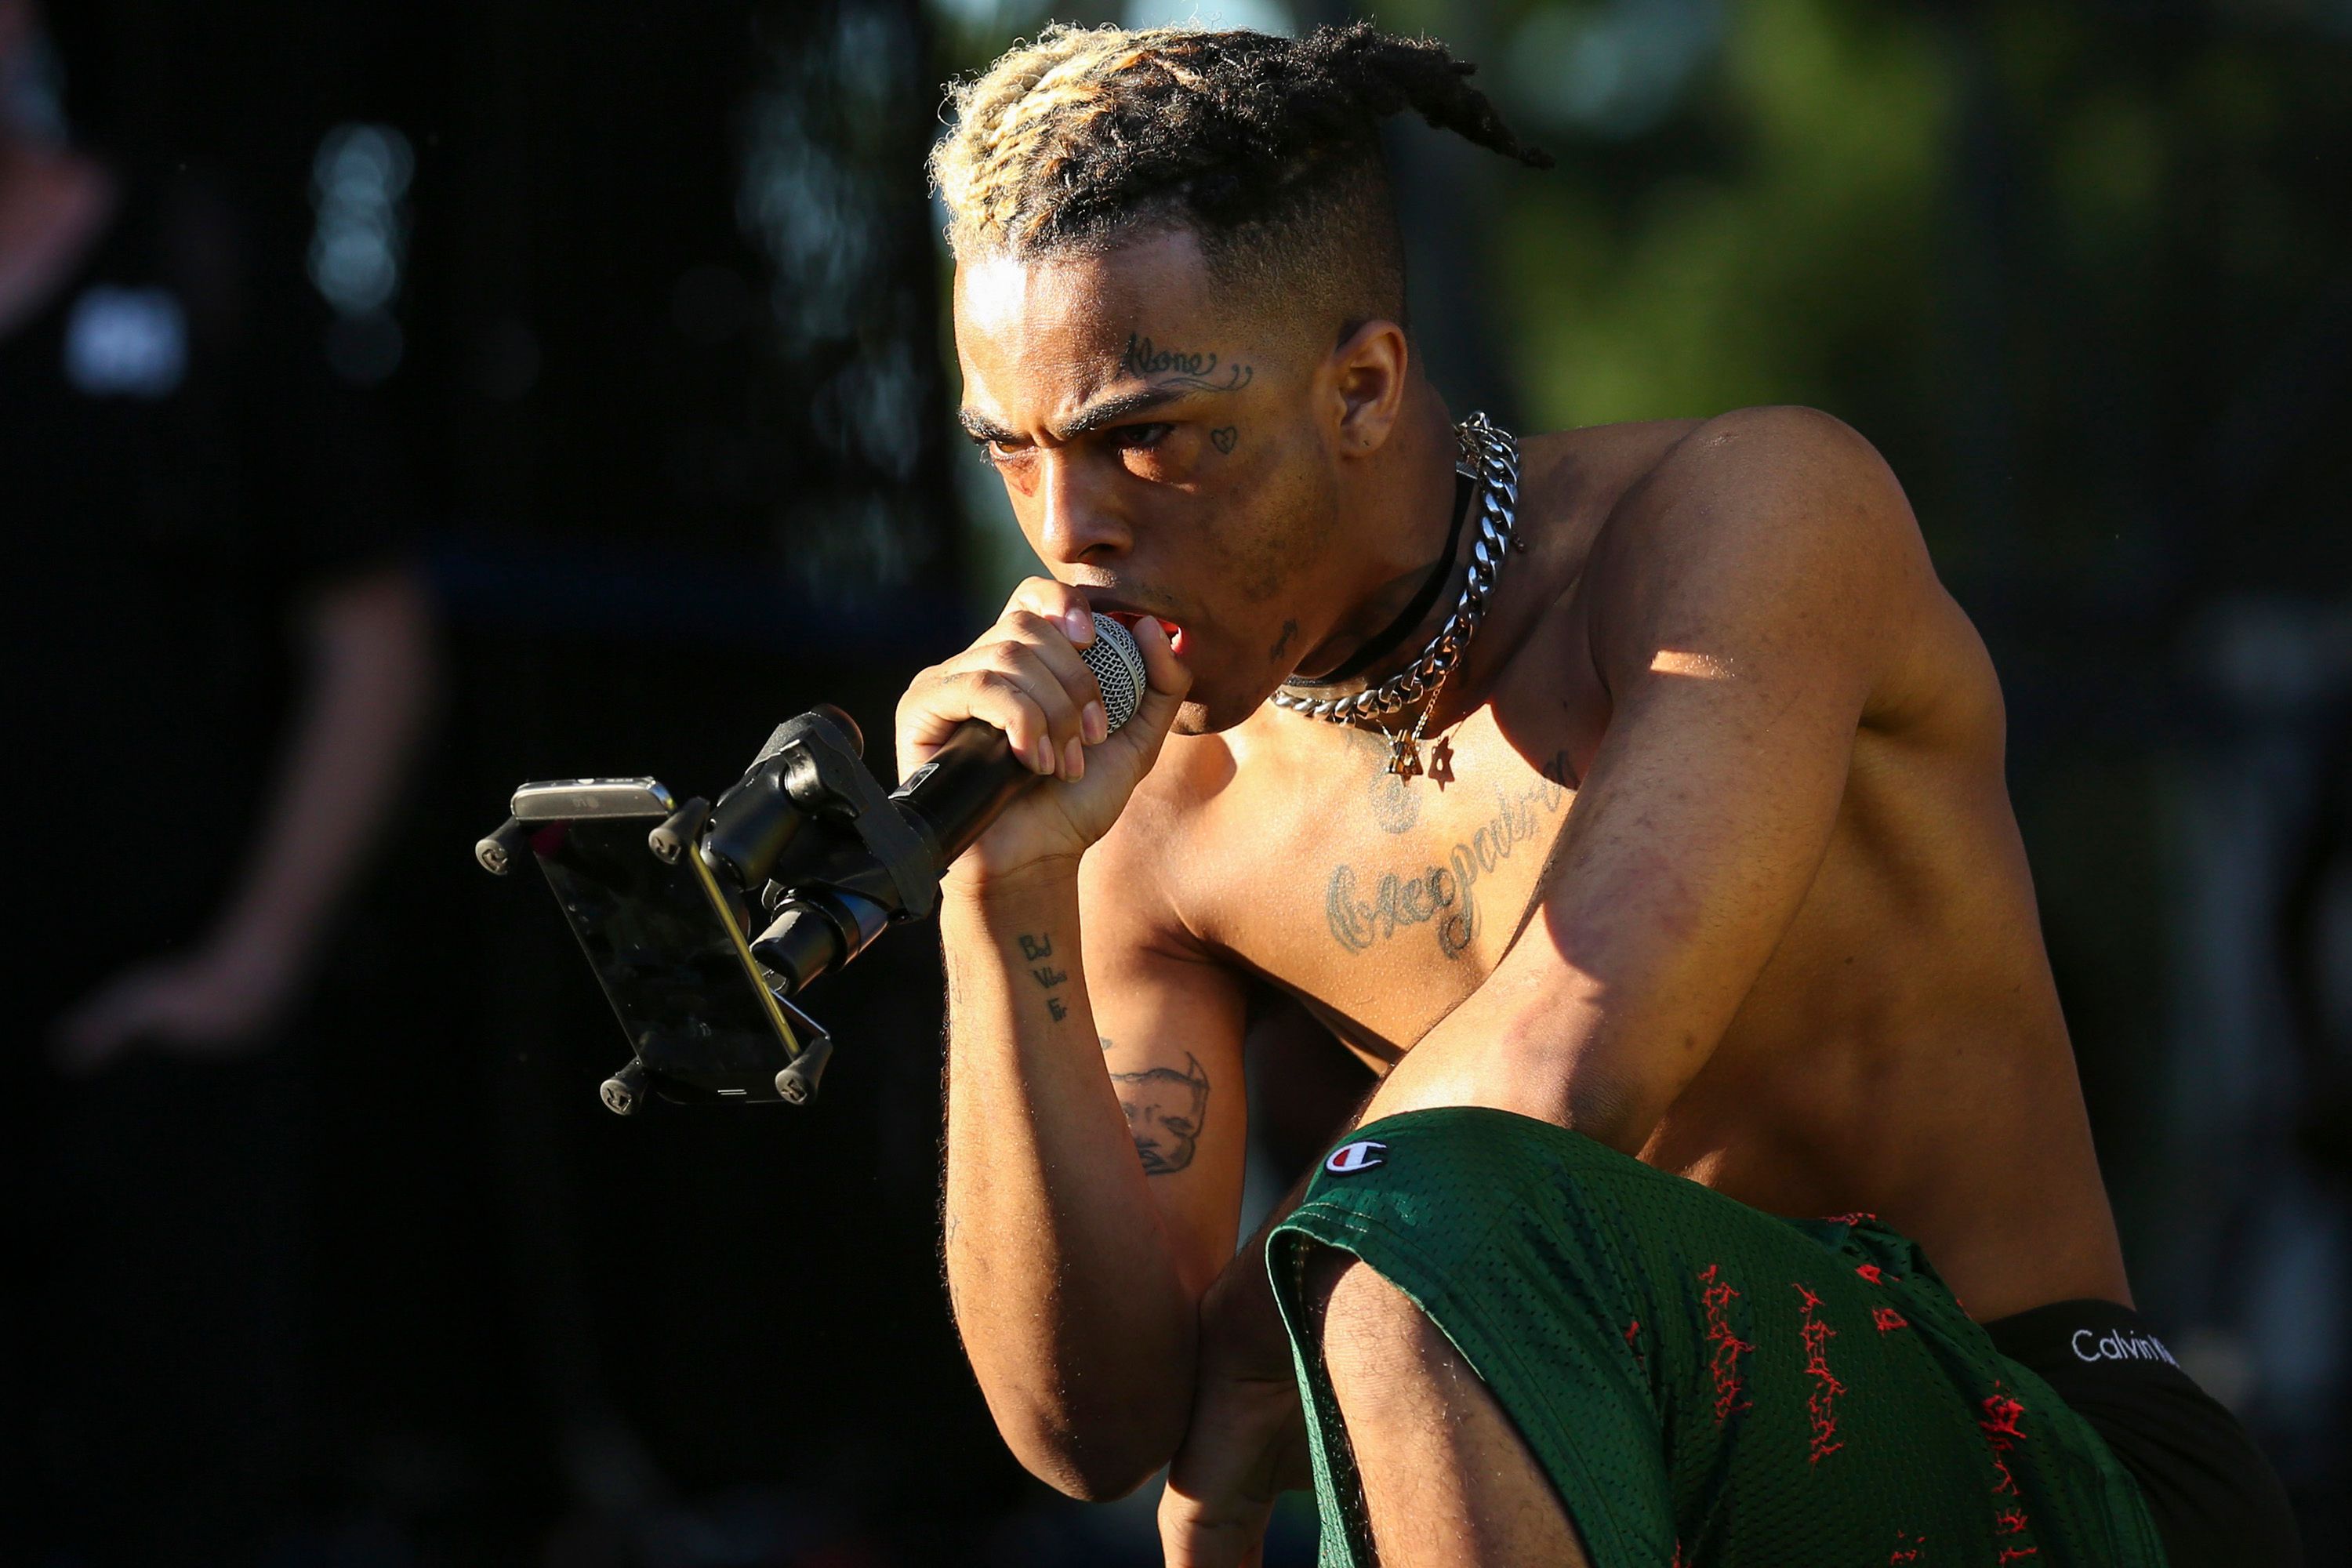 XXXTentacion performs during the second day of the Rolling Loud Festival in downtown Miami on Saturday, May 6, 2017. | Source: Getty Images